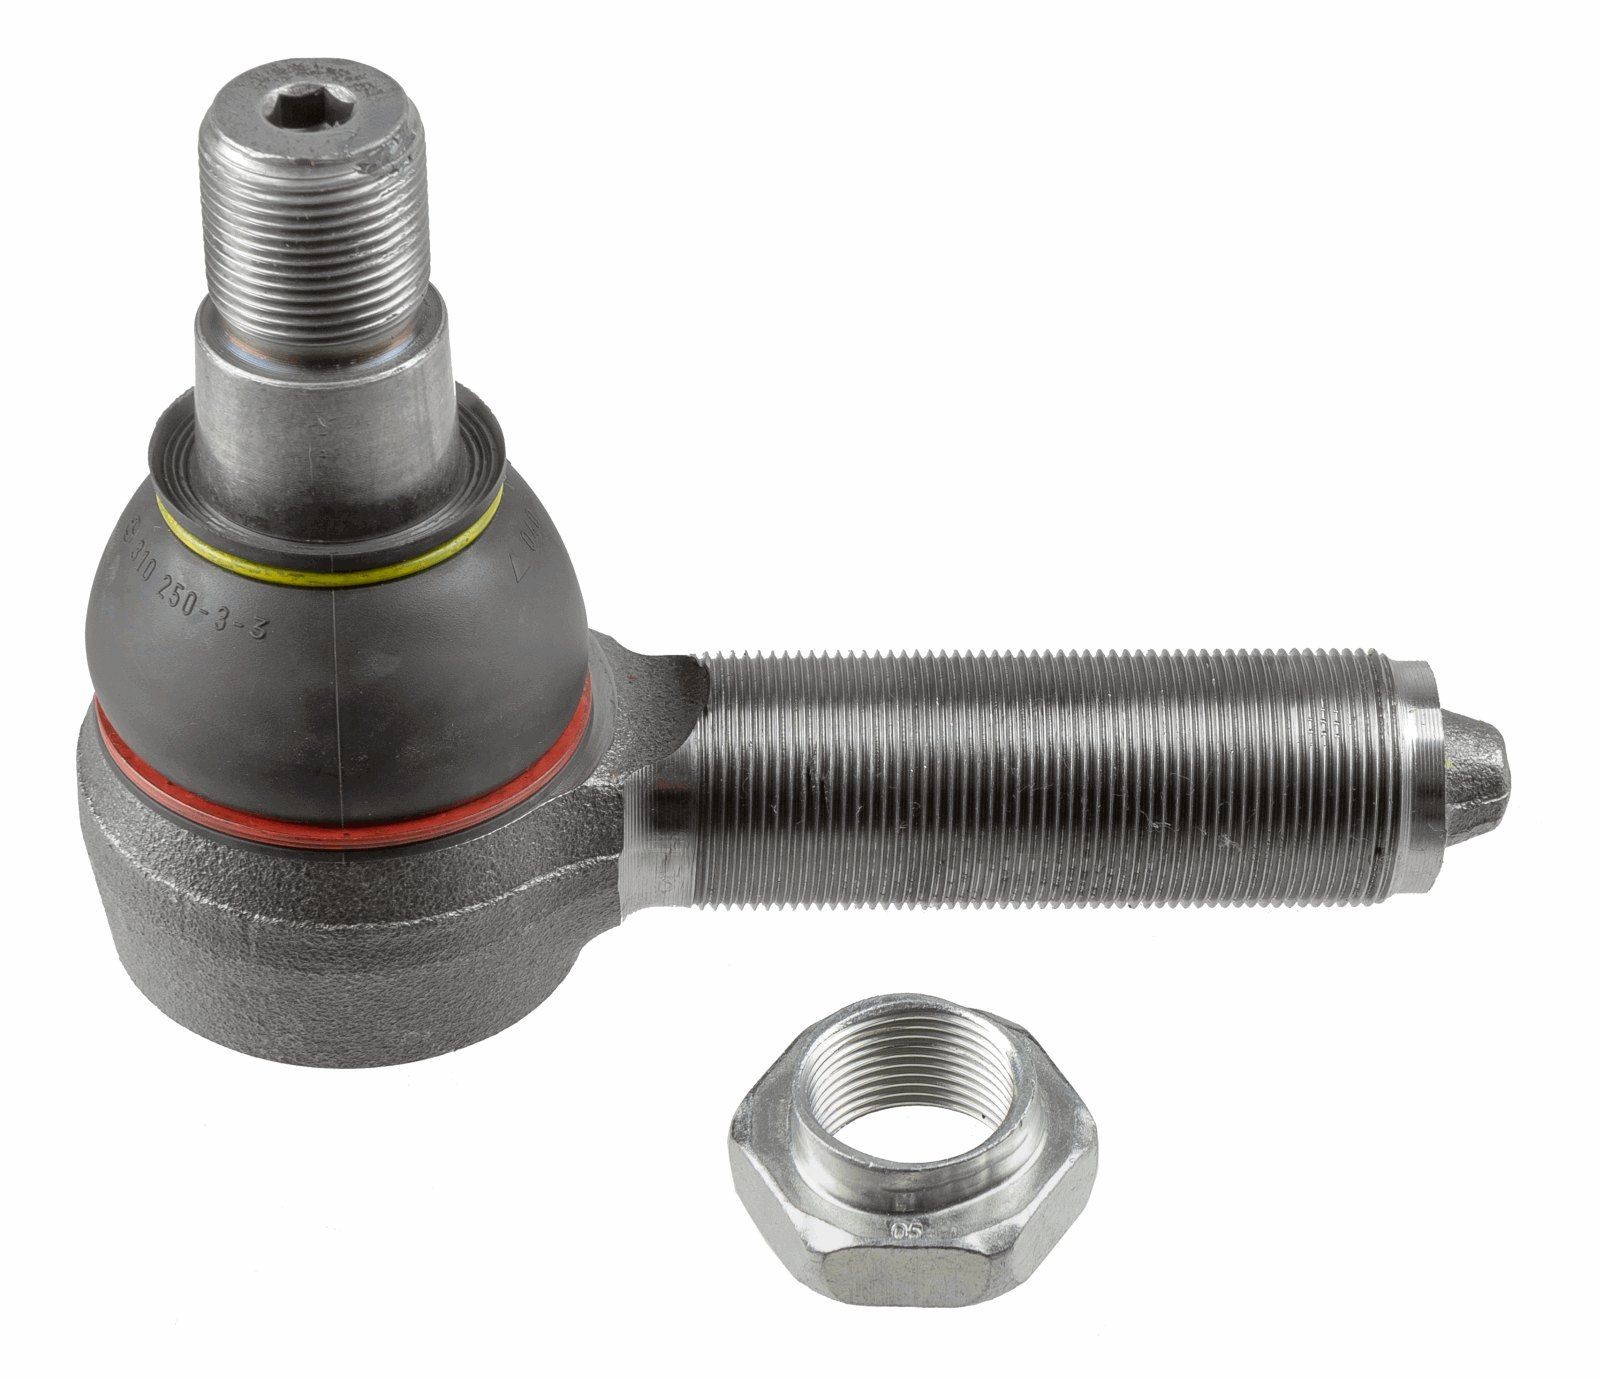 LEMFÖRDER 11492 03 Track rod end Cone Size 30 mm, M30x1,5 mm, with accessories